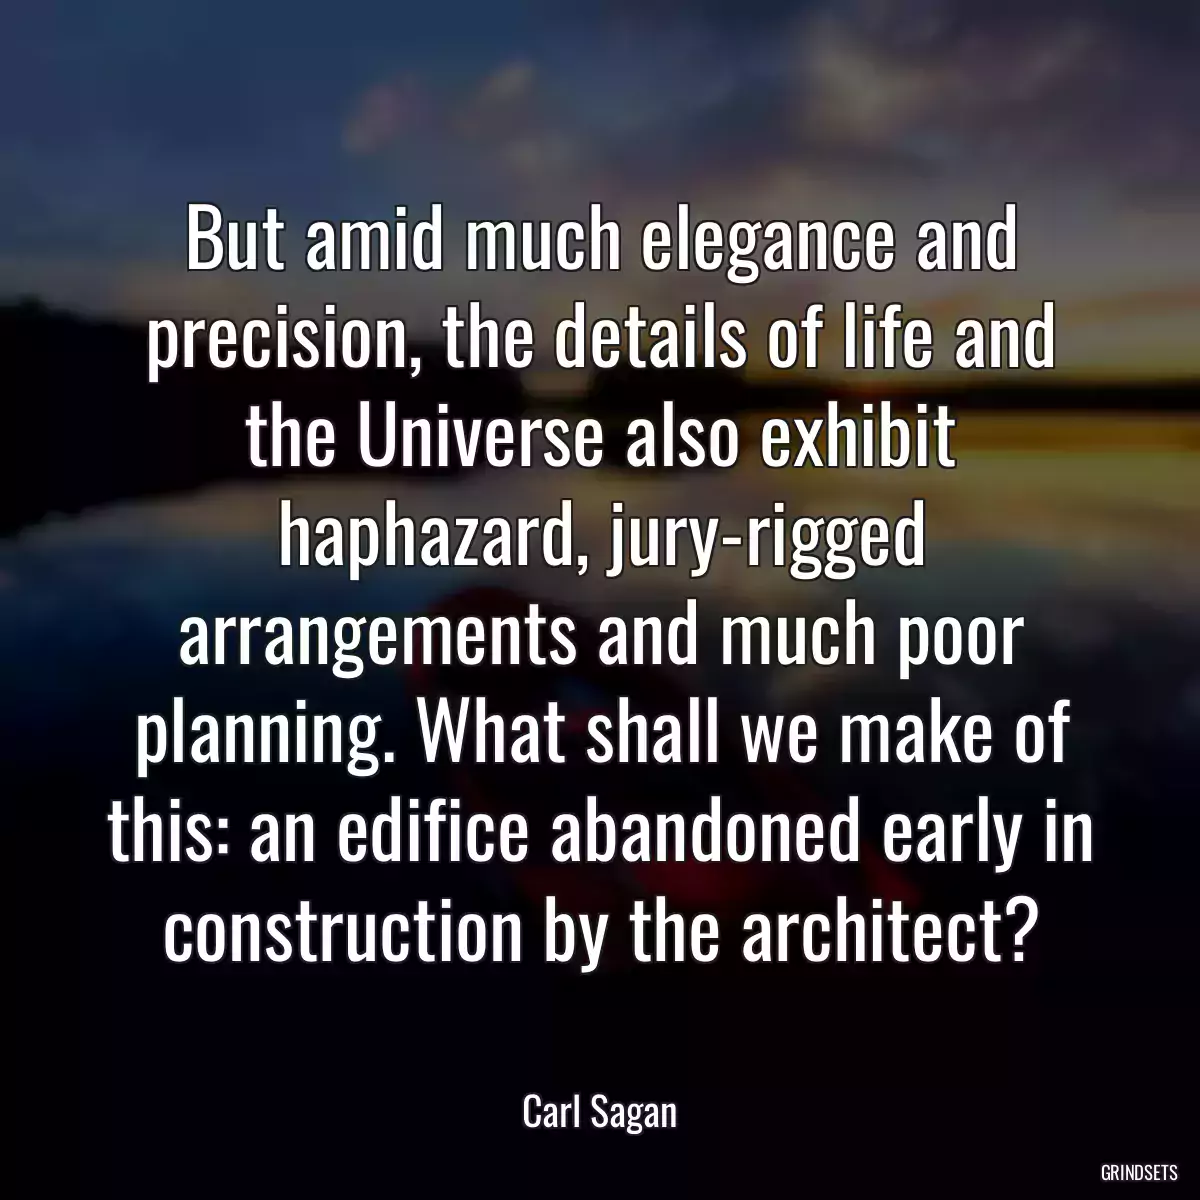 But amid much elegance and precision, the details of life and the Universe also exhibit haphazard, jury-rigged arrangements and much poor planning. What shall we make of this: an edifice abandoned early in construction by the architect?